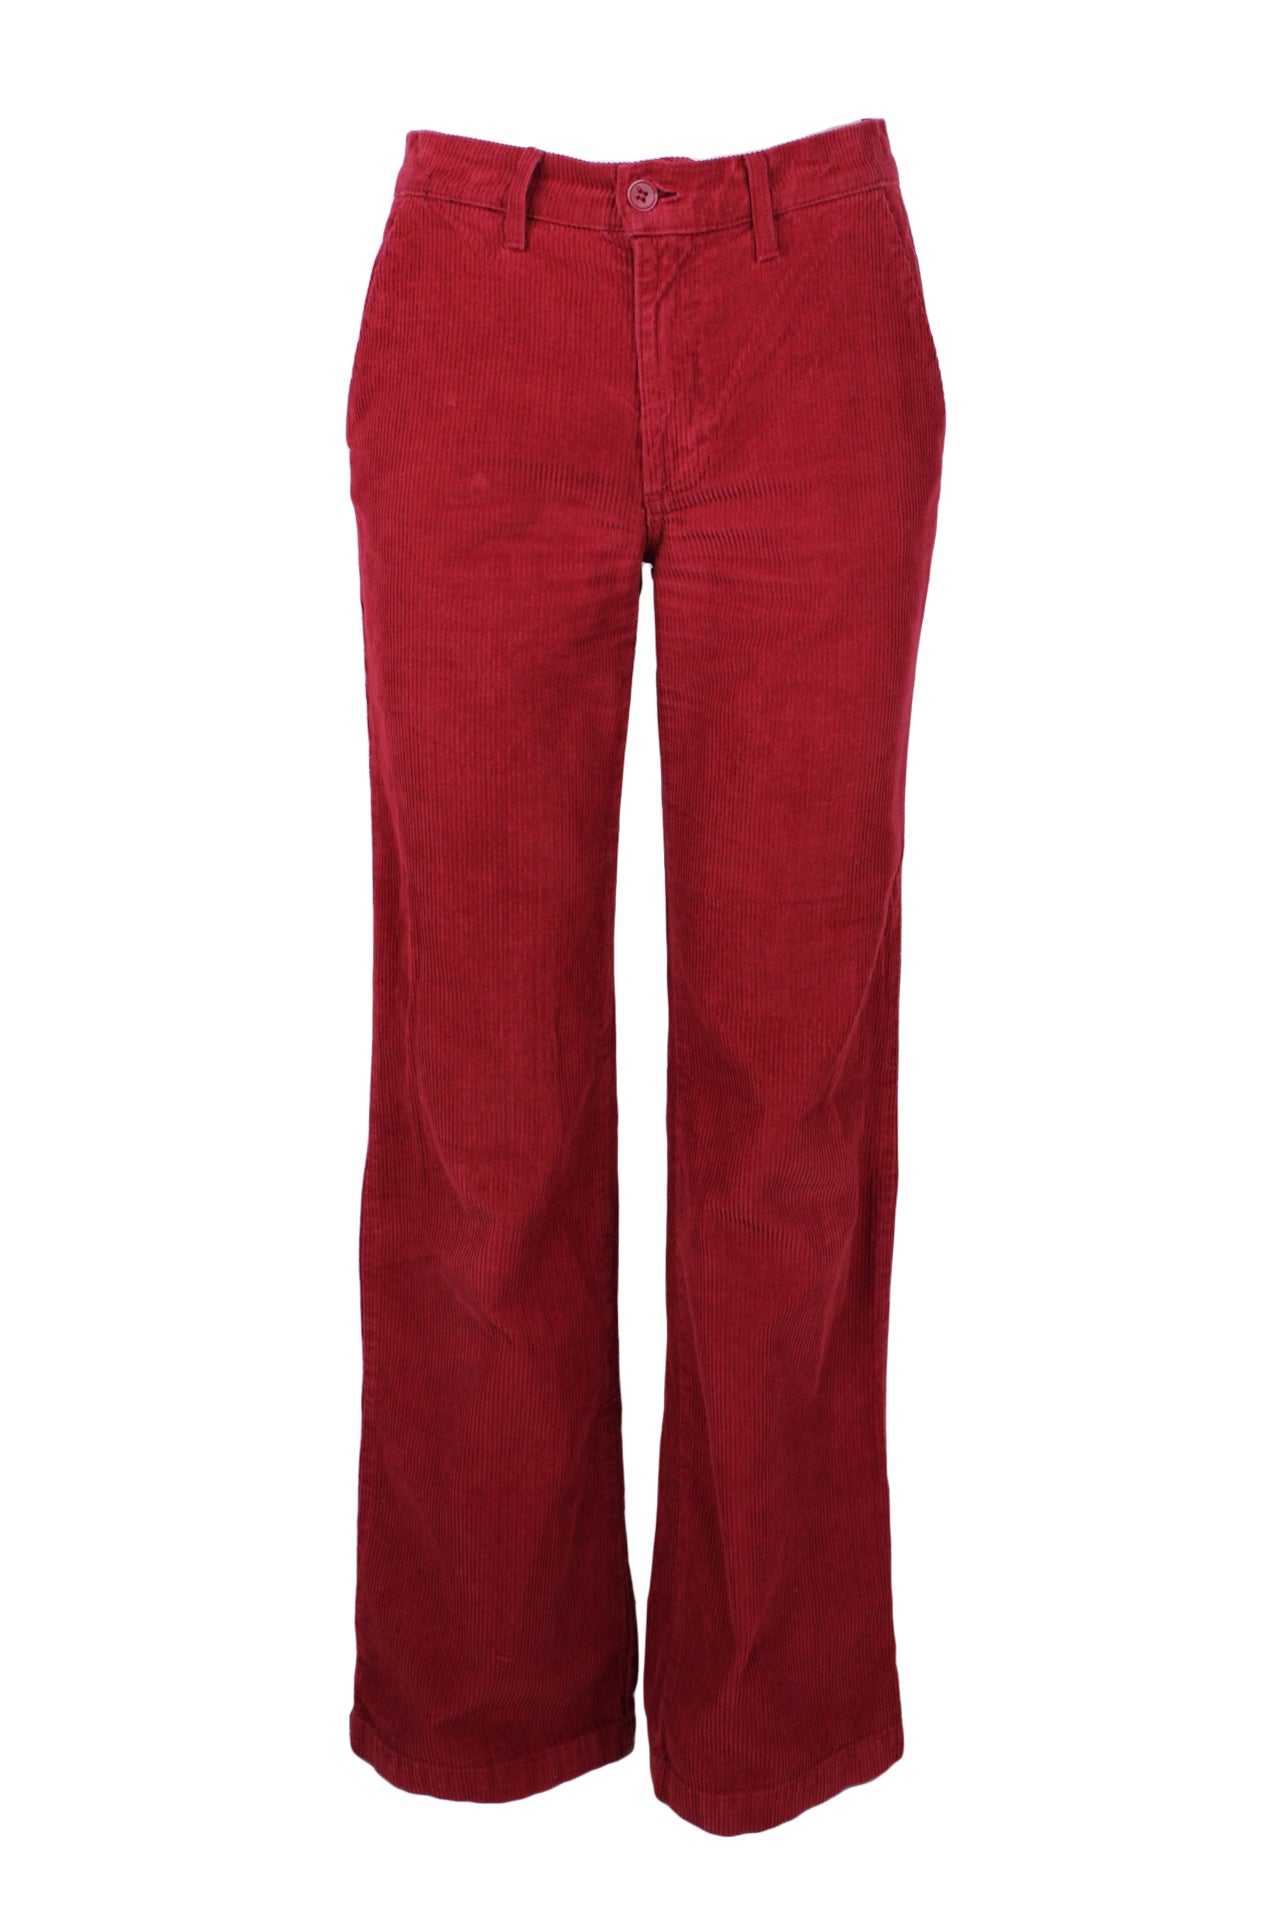 burgundy corduroy pants with flared legs